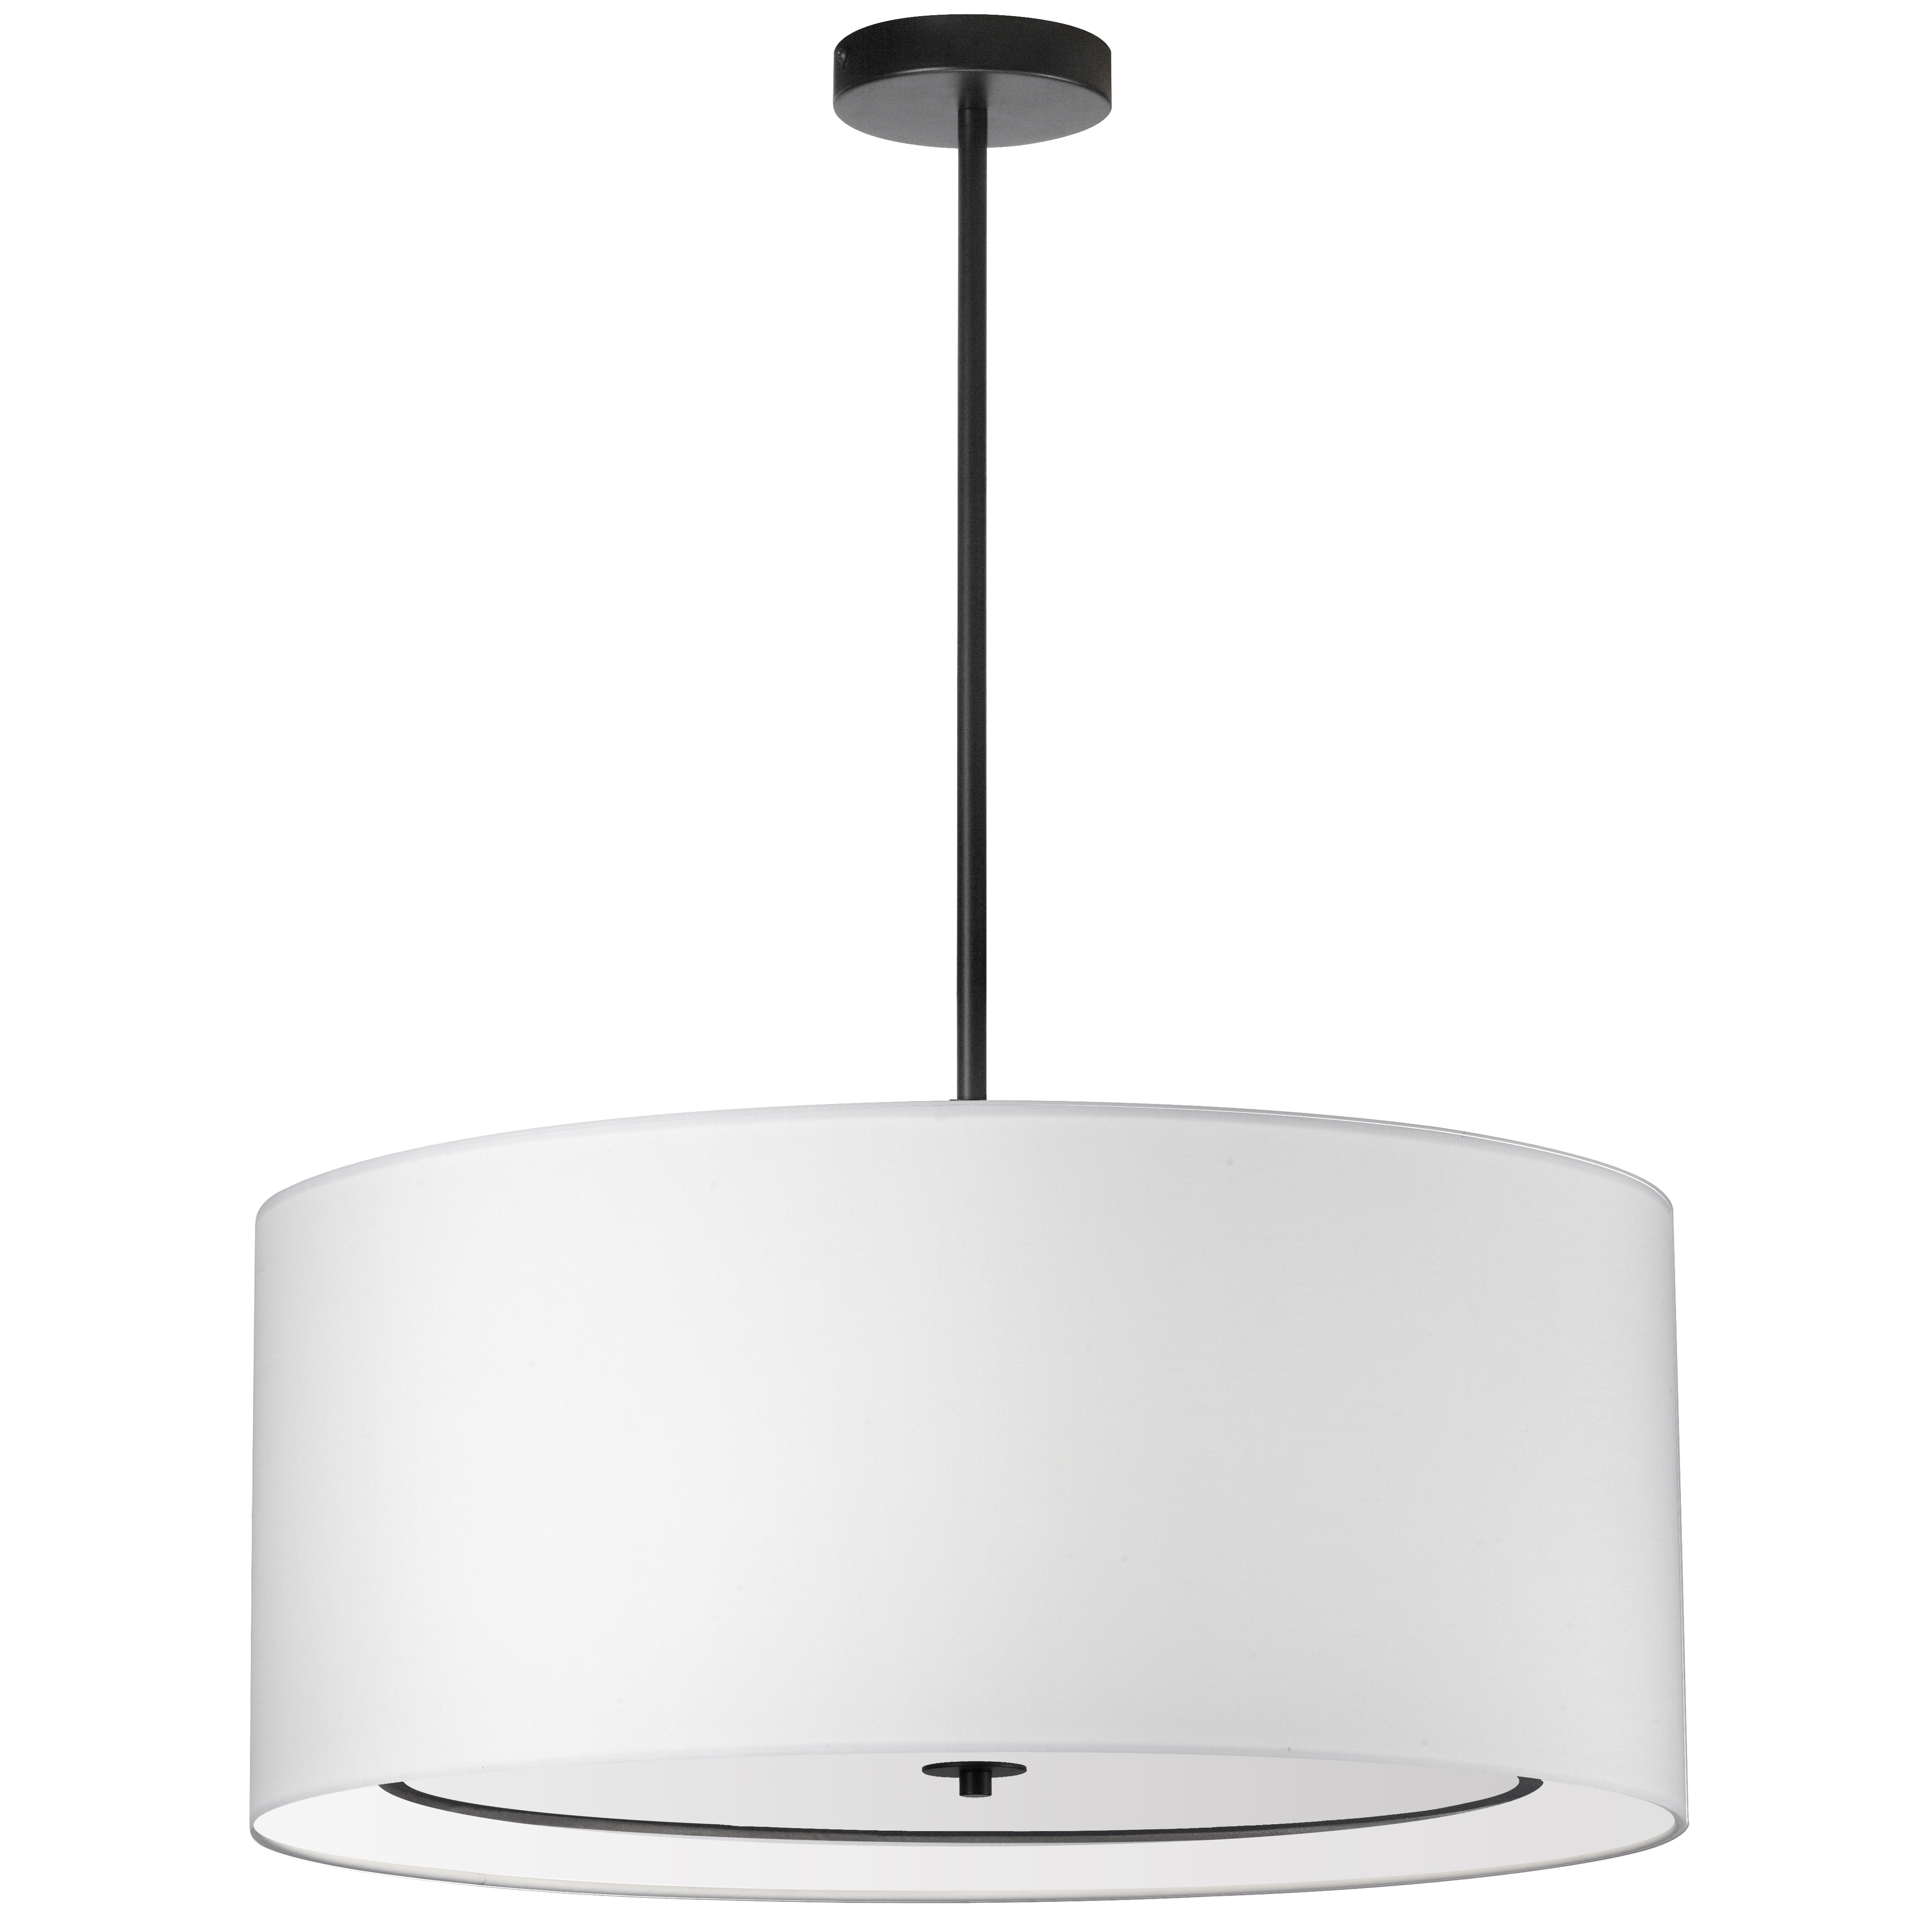 Elegant in its simplicity, the Porscha family of lighting adds a note of chic contrast to contemporary or minimalist furnishings. Its pleasing curves make a definitive statement in refined style. The metal frame comes in matte black finish, contrasted by a white fabric shade. It's a classic color combination echoed in the white and black diffuser along the inside of the design. It's a clean and traditional drum shade design with a polished contemporary makeover, perfect for living rooms, kitchens or foyers.  